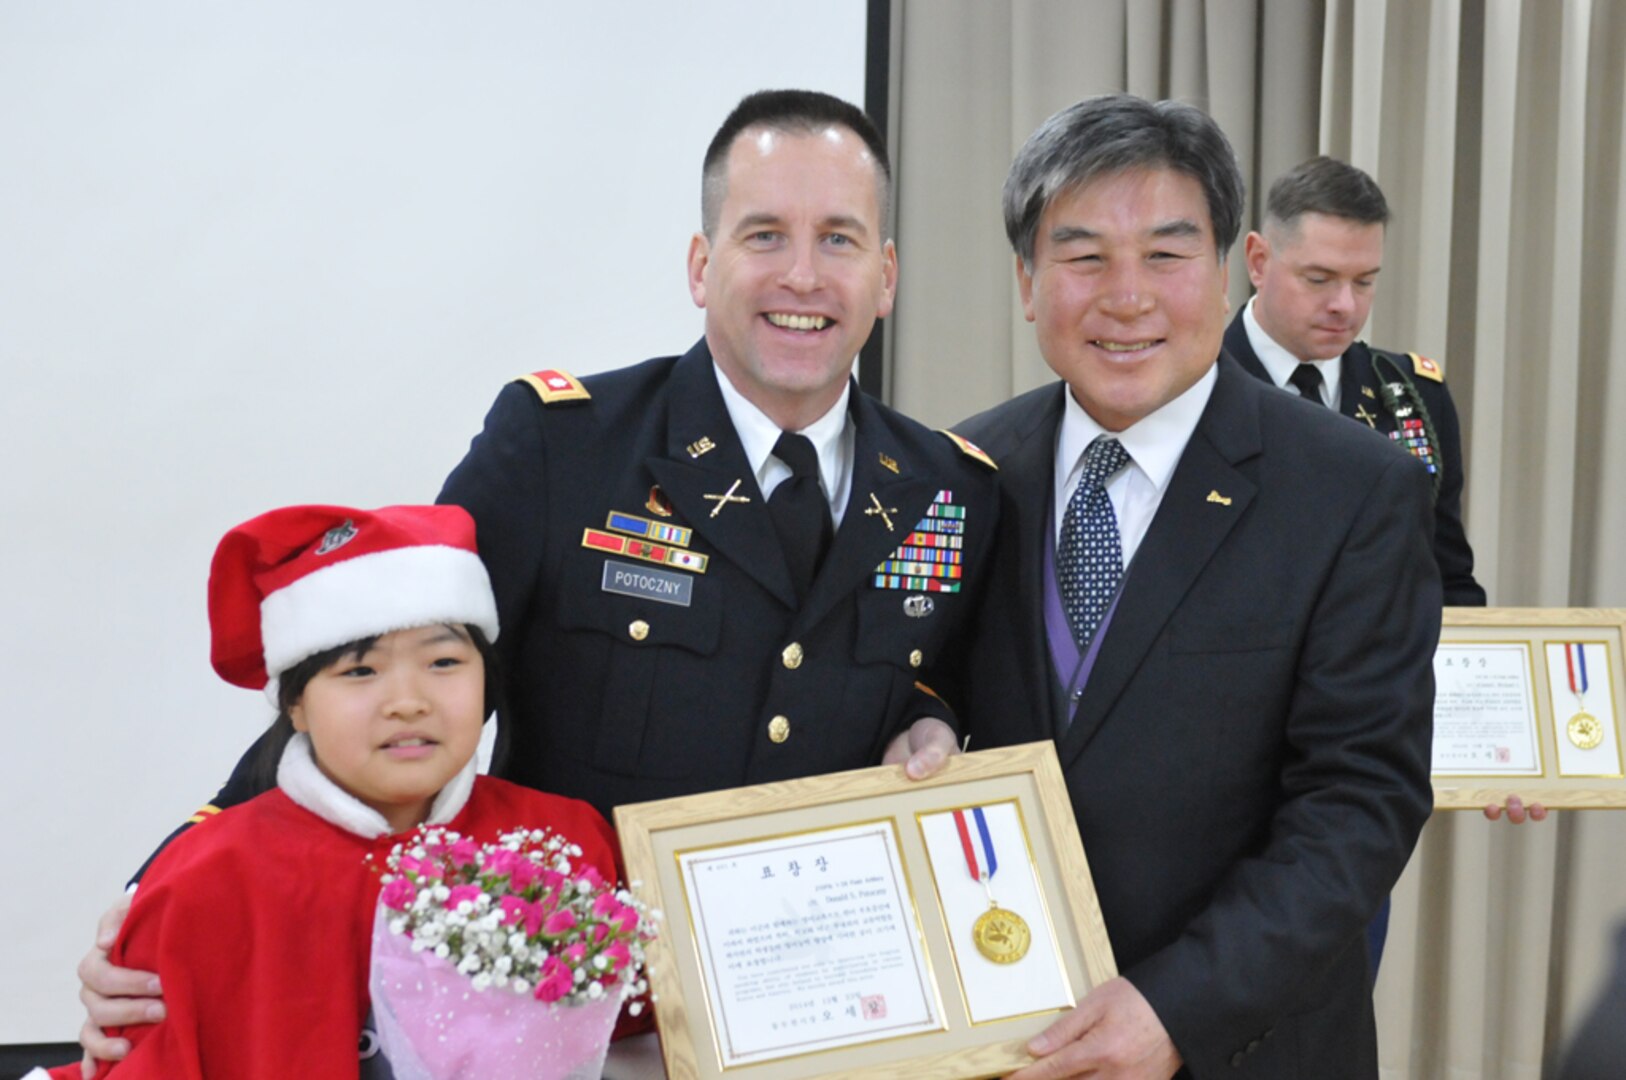 DONGDUCHEON, South Korea (Dec. 23, 2014) - Lt. Col. Don Potoczny, the commander of 1st Battalion, 38th Field Artillery Regiment, 210th Field Artillery Brigade, 2nd Infantry Division, receives an award from Mayor Oh Se-chang of Dongducheon, for his service in the local High-Five English program at Dongducheon Yangju Office of Education.  (U.S. Army photo by Cpl. Song Gun-woo, 210 FA BDE PAO)